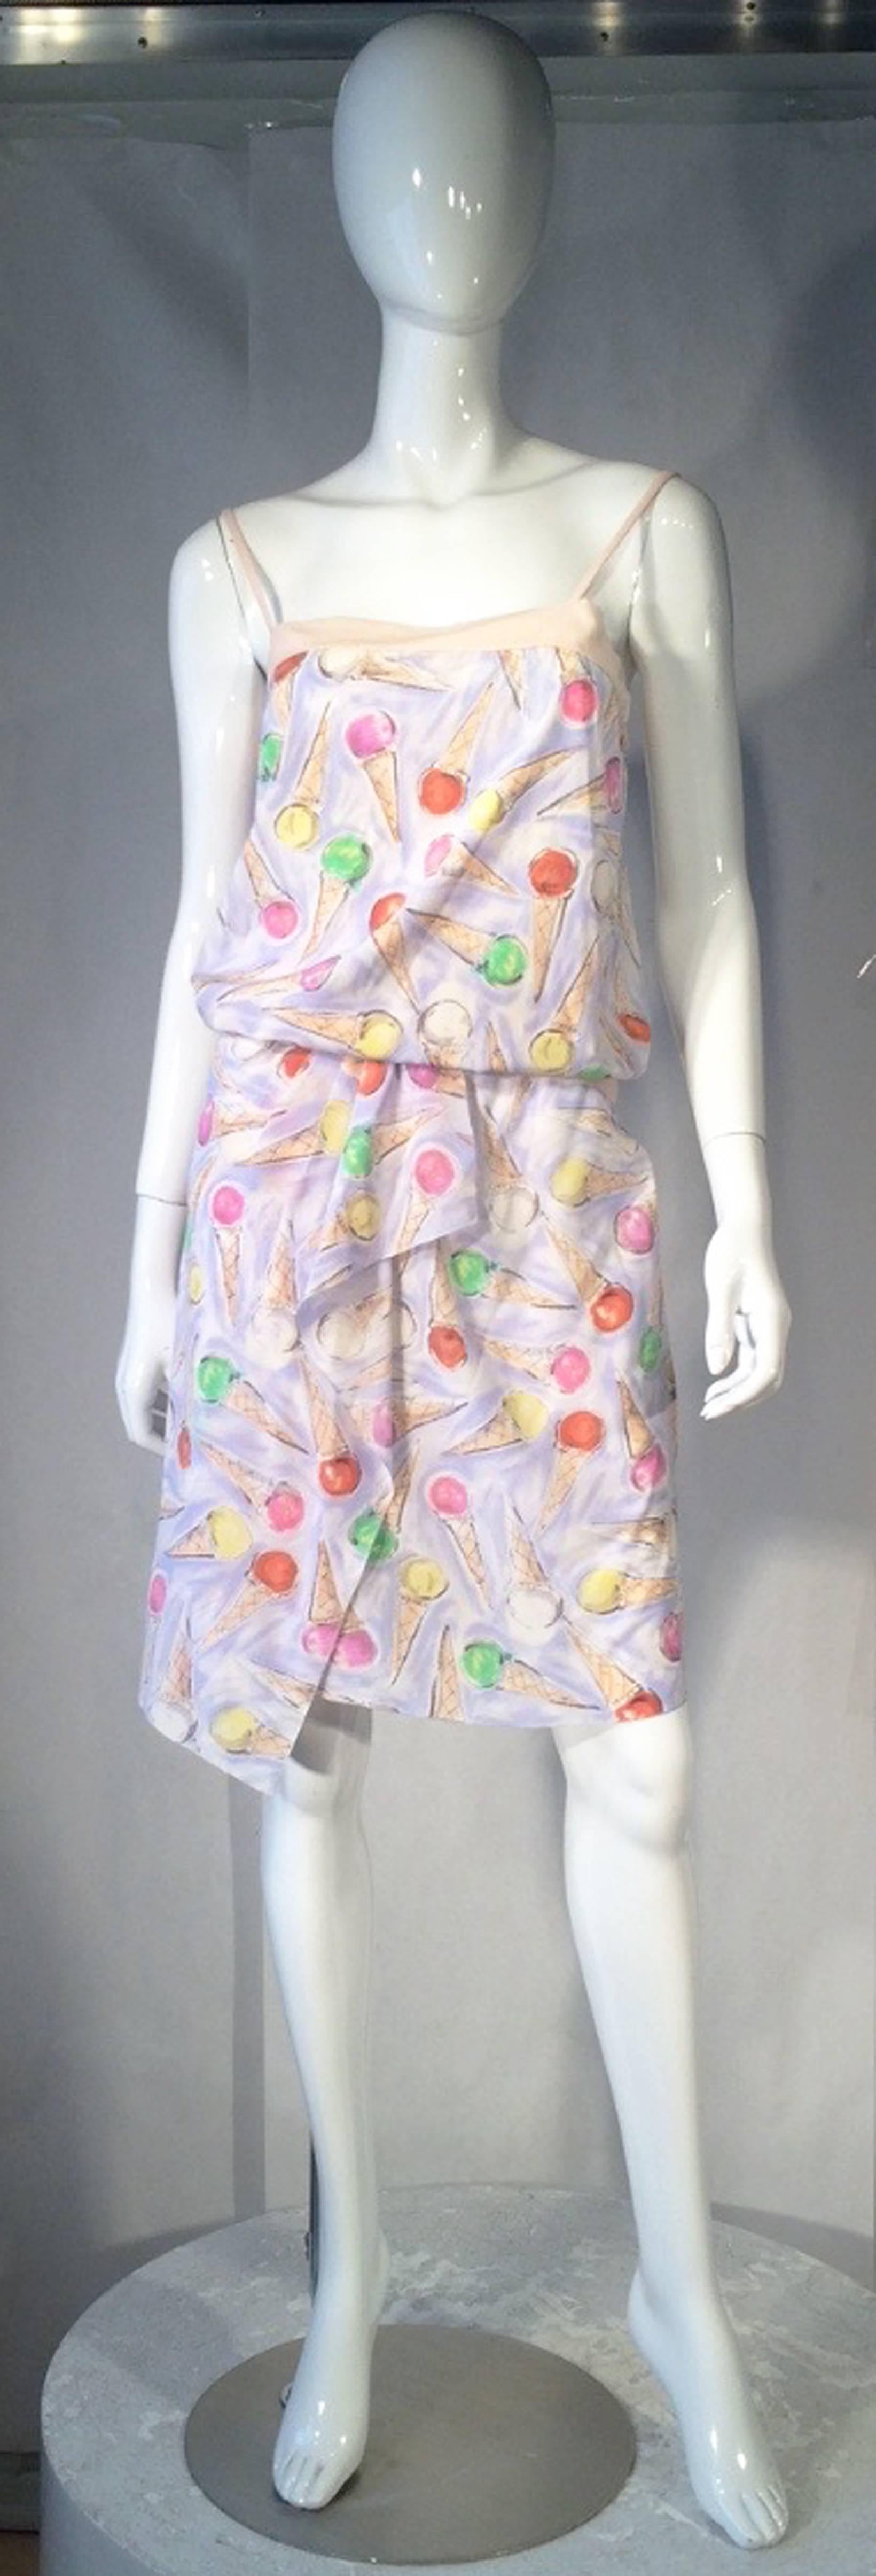 Iconic Chanel ice cream print 2pc. dress (Cruise collection, 2004). Silk crepe print items include a tank top (slips over head) and matching draped front skirt (buttons up back). Both items trimmed in a nude colored crepe. Pristine appears unworn.